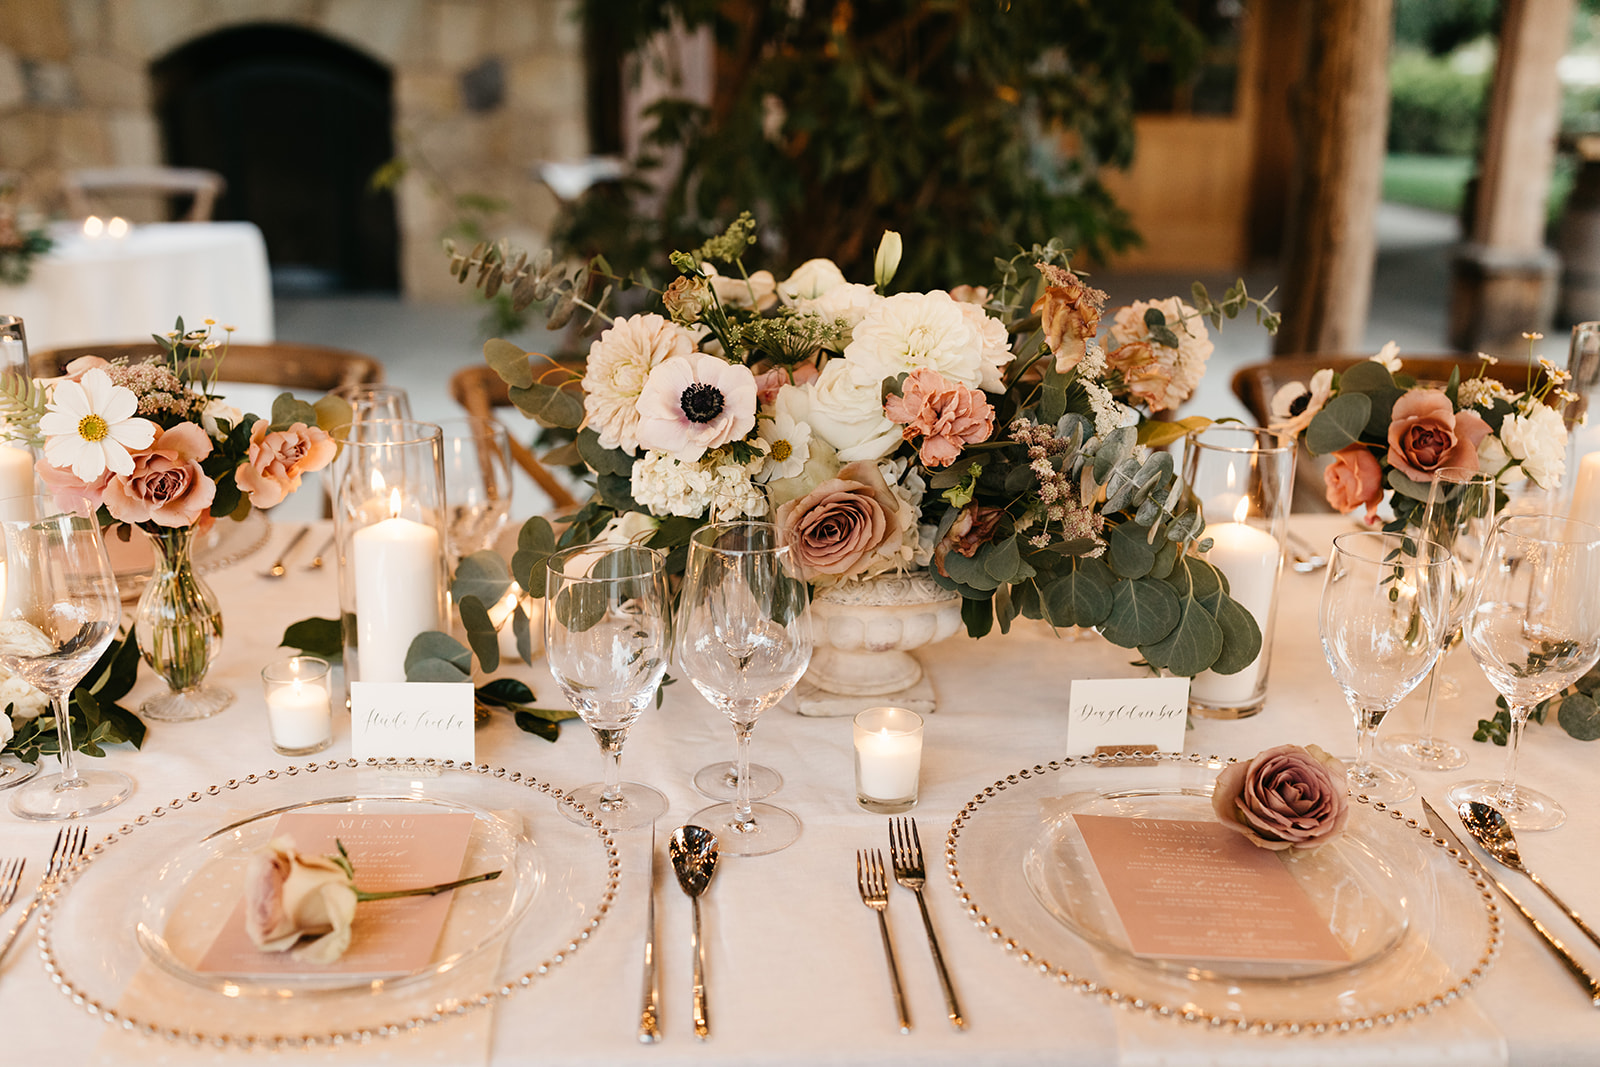 Intimate vineyard wedding reception at Roblar winery under market lights with blush pink and greenery